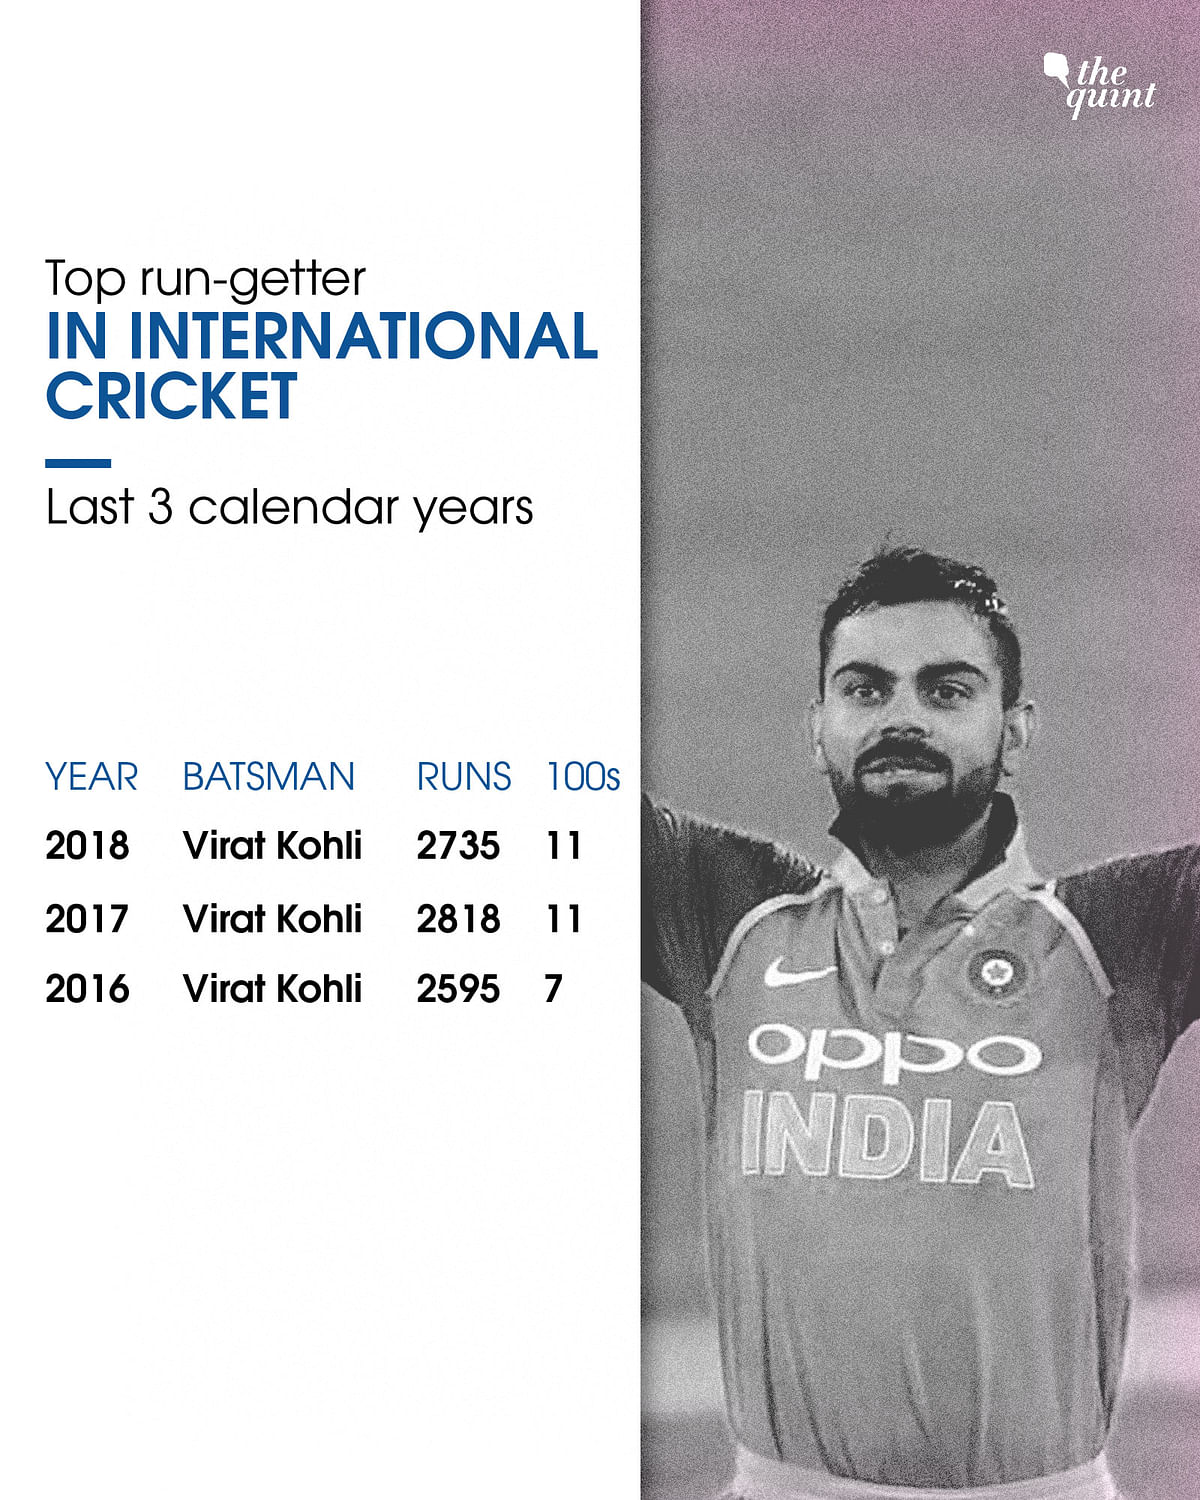 Here’s a wish list reminding Virat Kohli all things he should aspire to achieve in the coming twelve months.